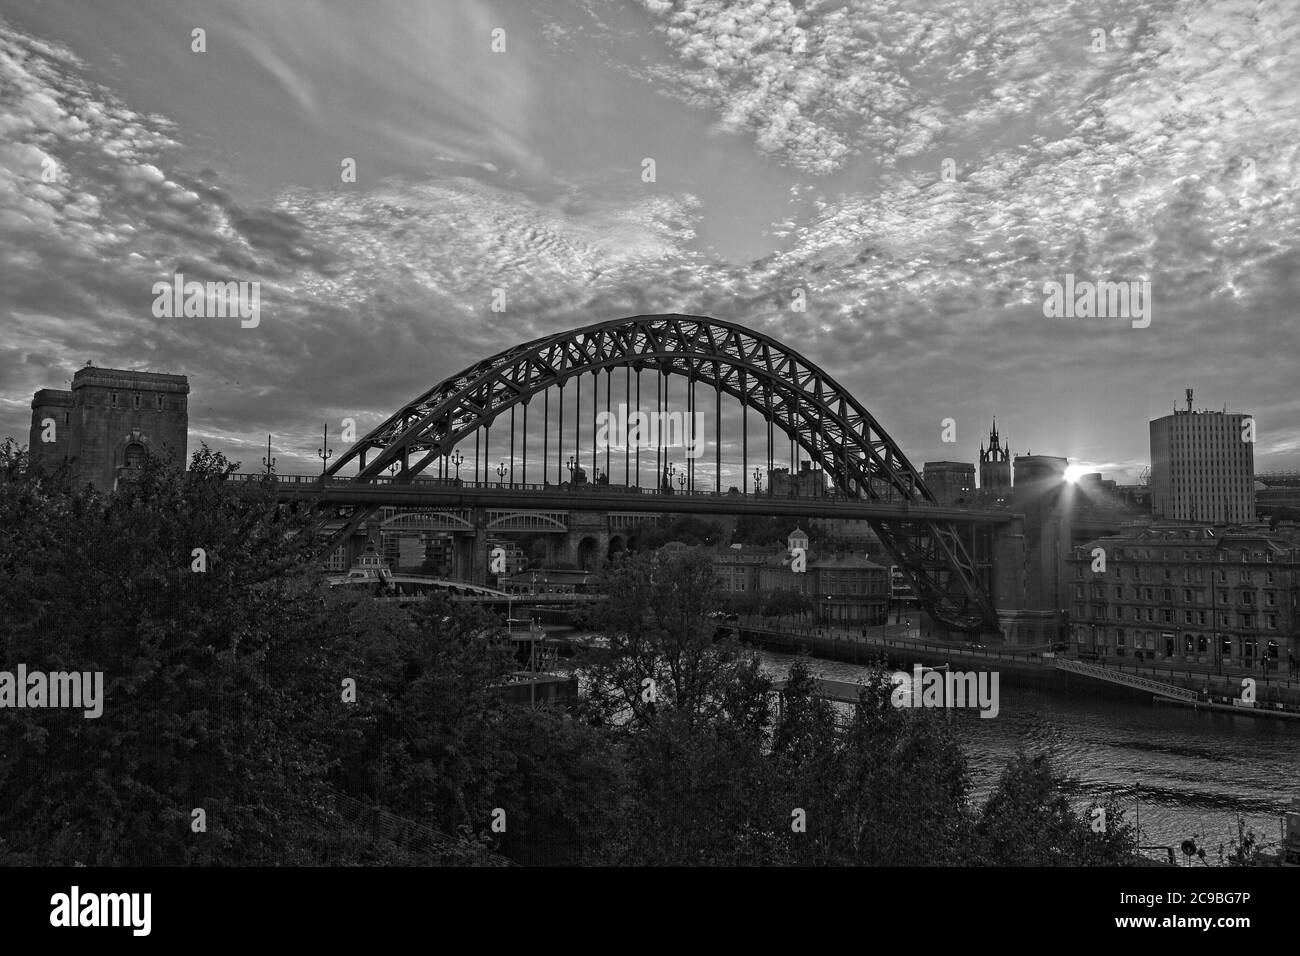 The iconic arch of the Tyne Bridge and quayside in Newcastle, Tyne and Wear taken at sunset from the Gateshead side of the River Tyne. Stock Photo